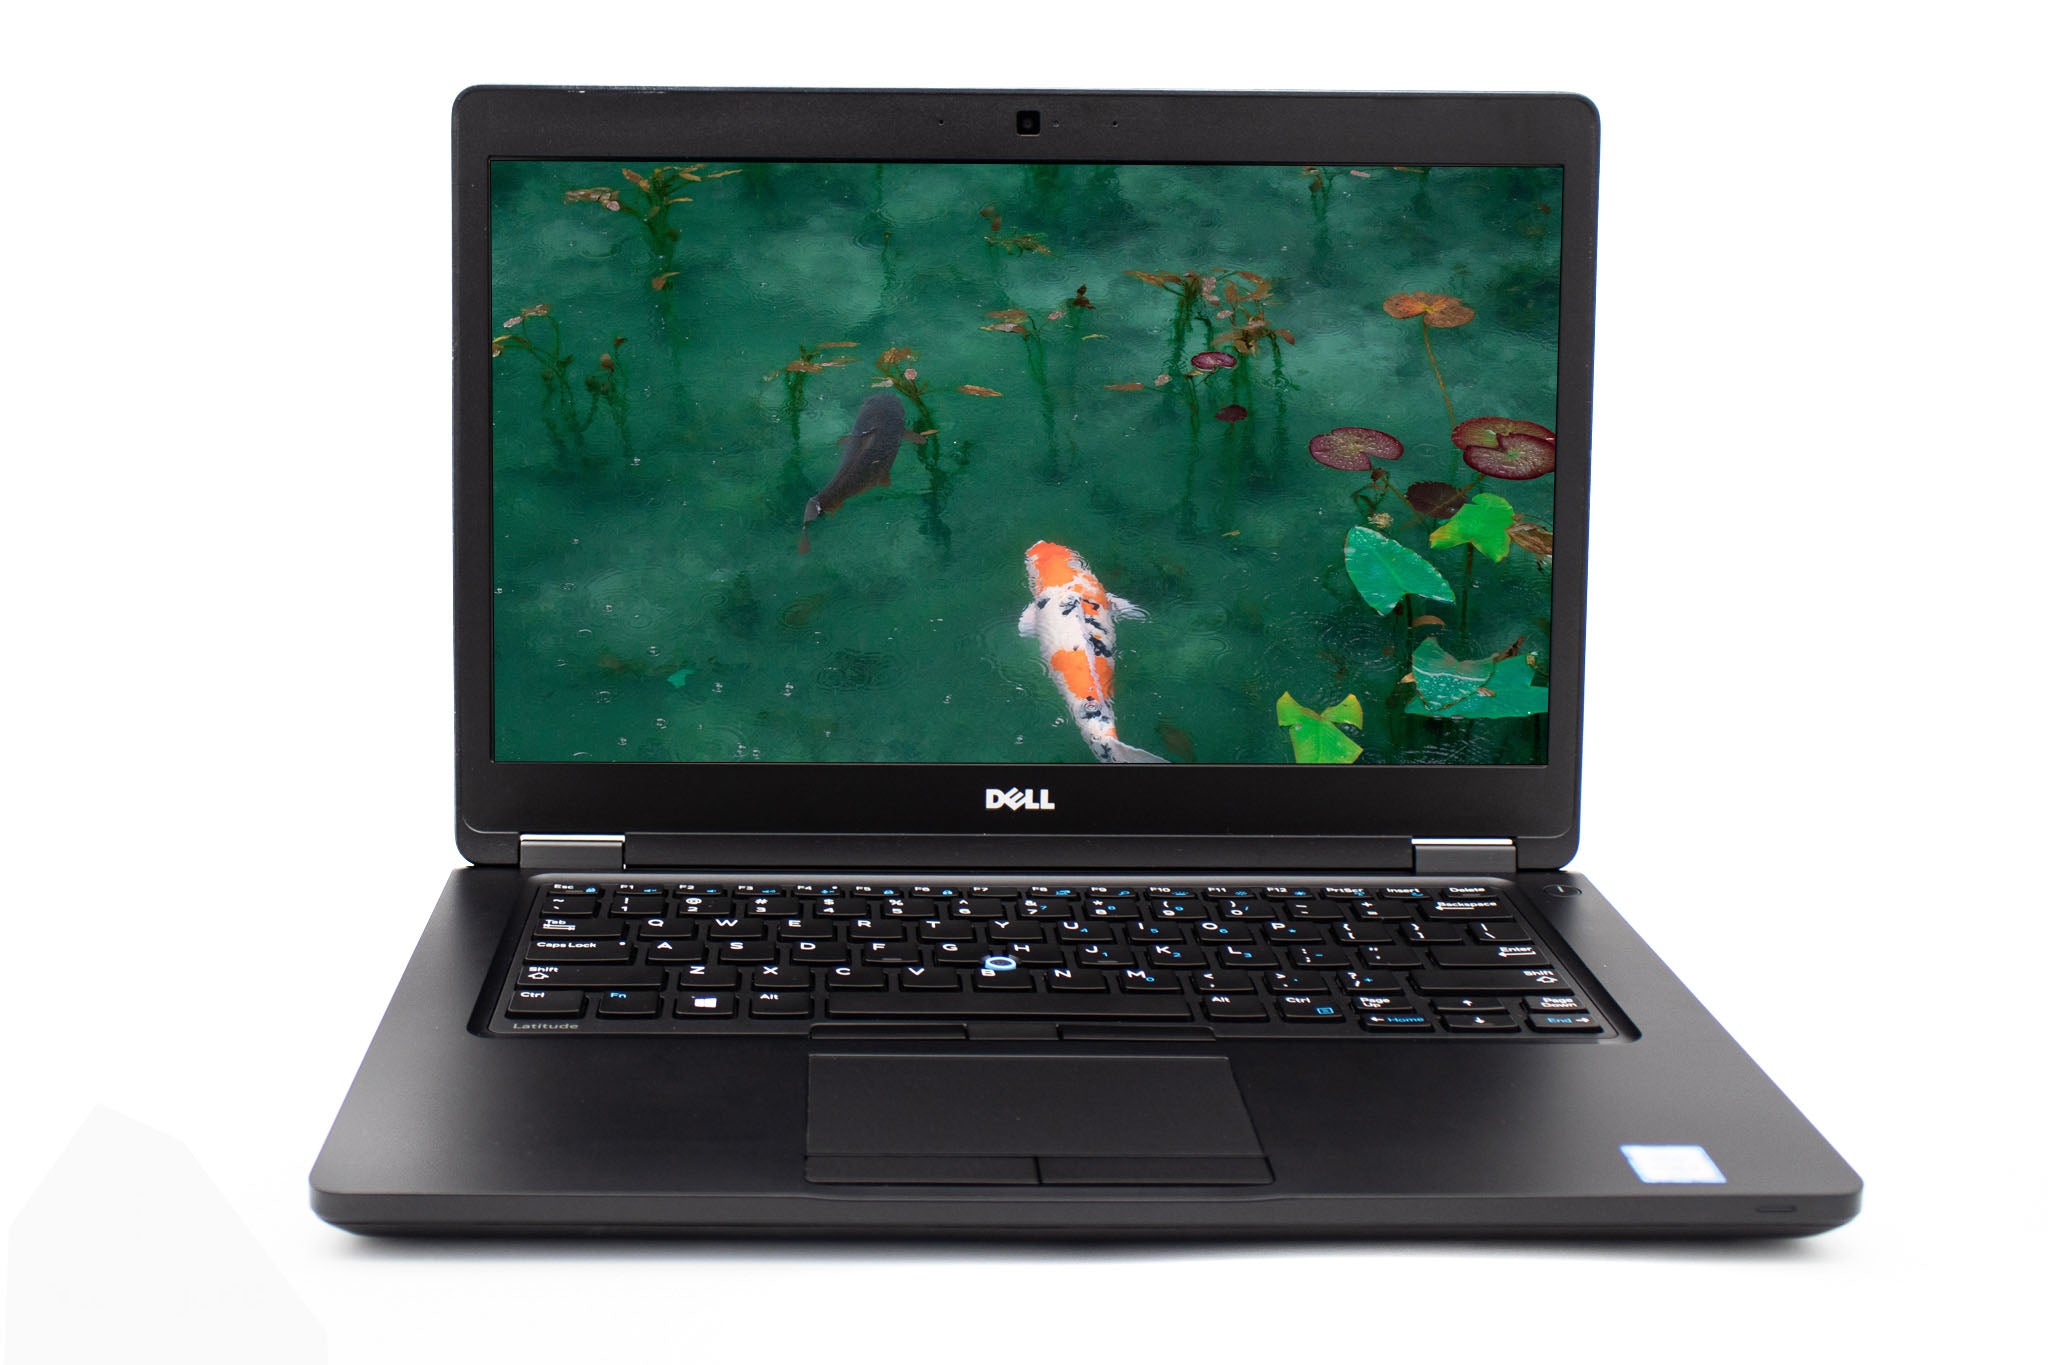 Refurbished Dell Latitude E5480 Laptop Computer, Intel Core i5, 128GB Solid State Hard Drive, 8GB Ram, Windows 11 Operating System One Year Warranty